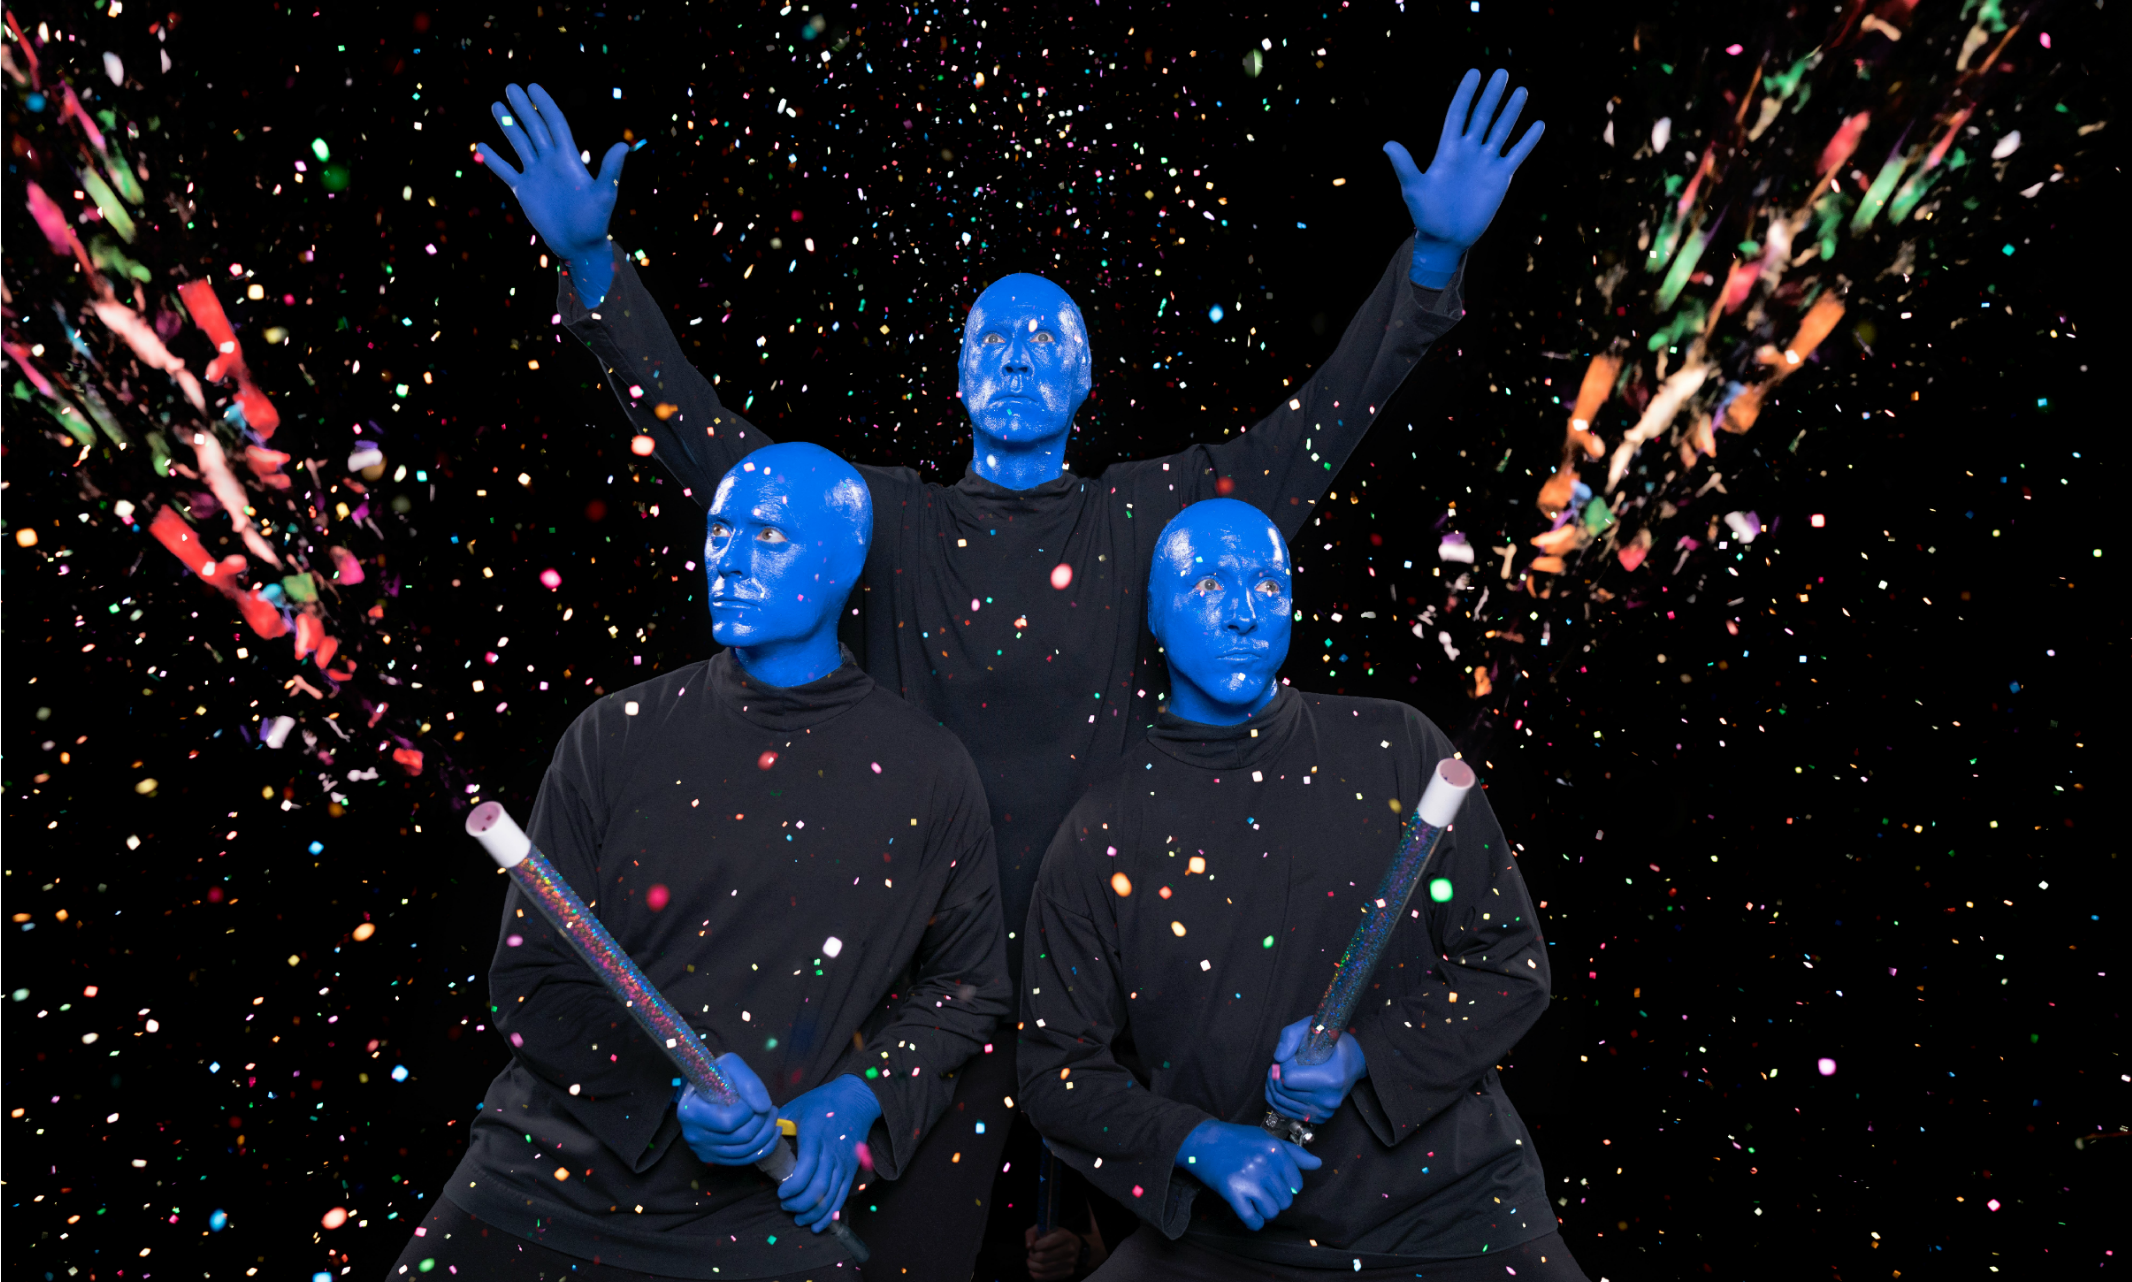 Matt Ramsey, pictured center, with the Blue Man Group spraying paint everywhere.